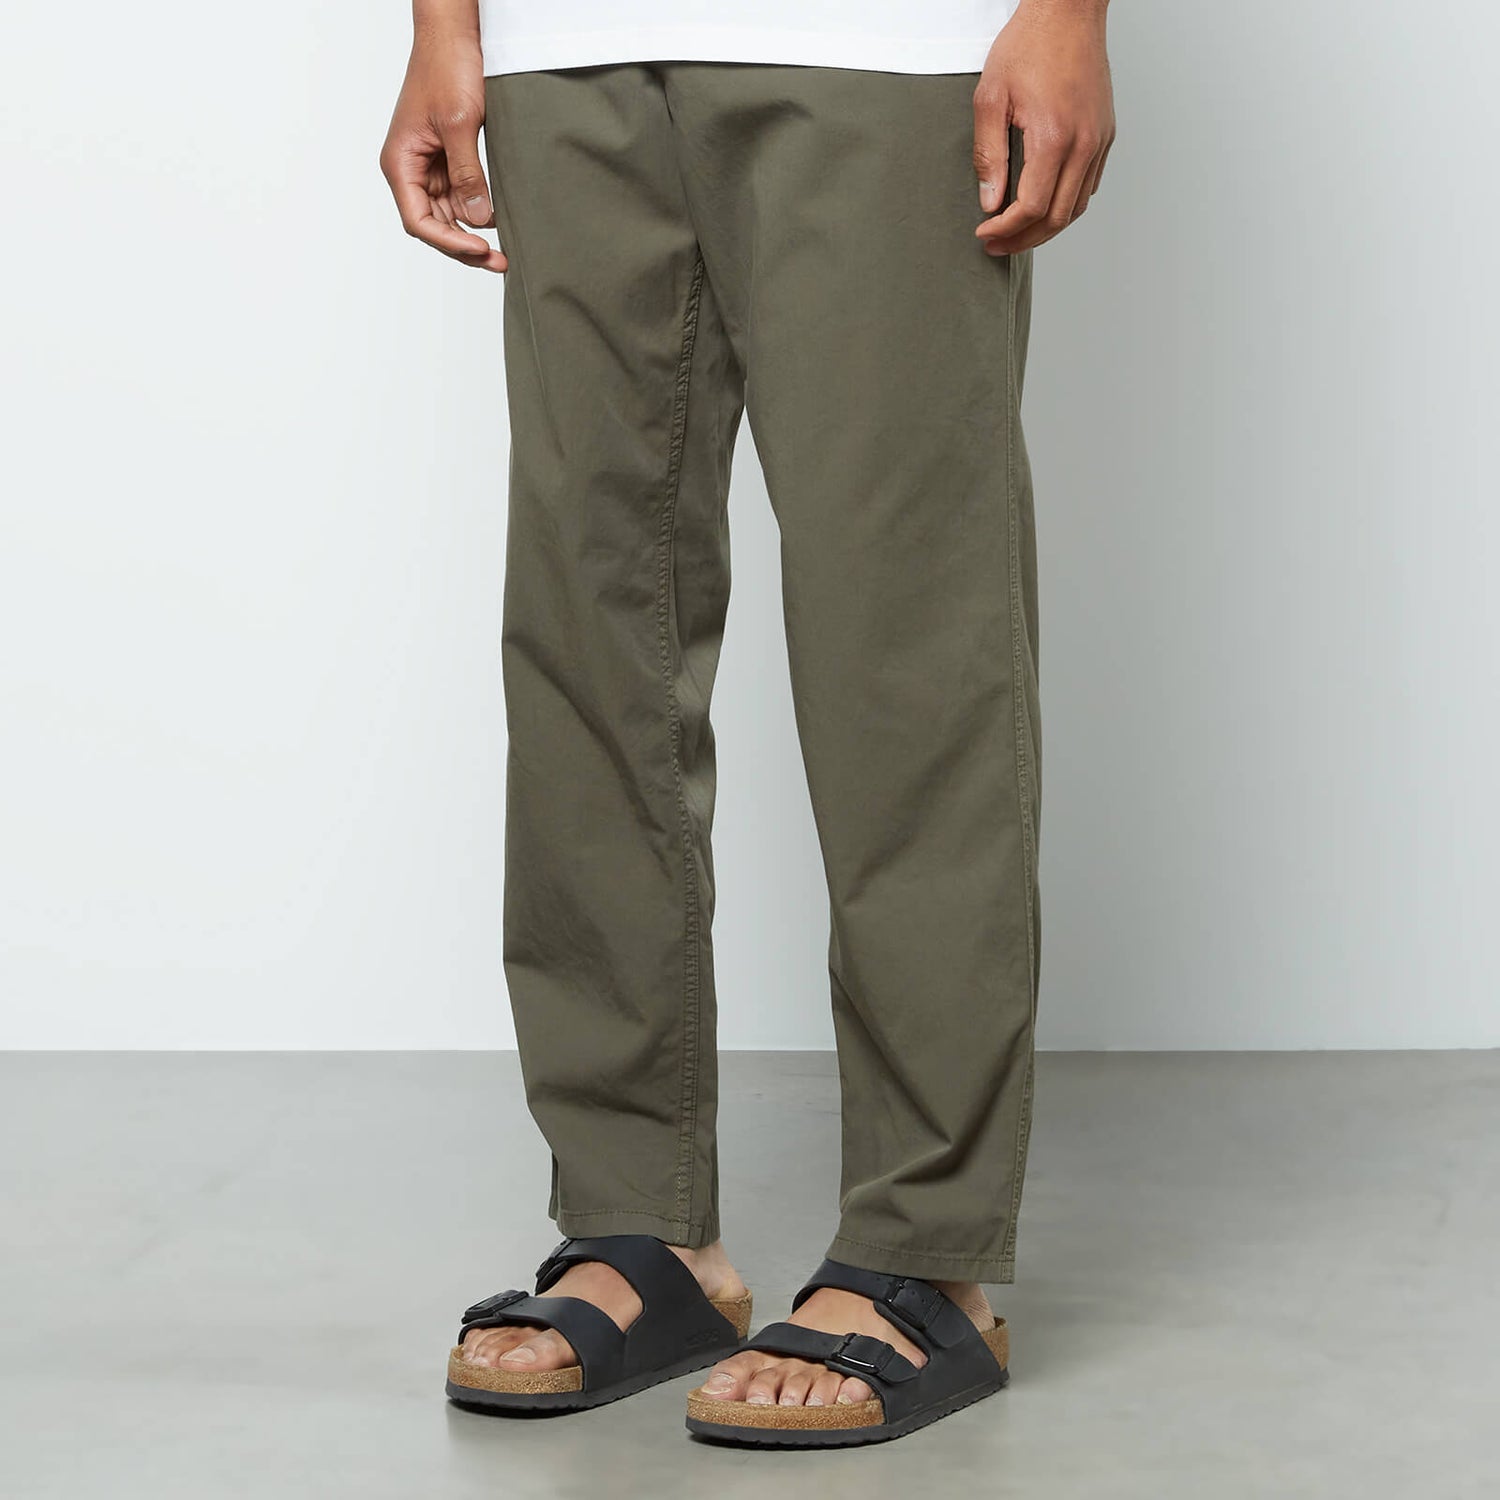 Norse Projects Men's Ezra Light Twill Trousers - Ivy Green - M